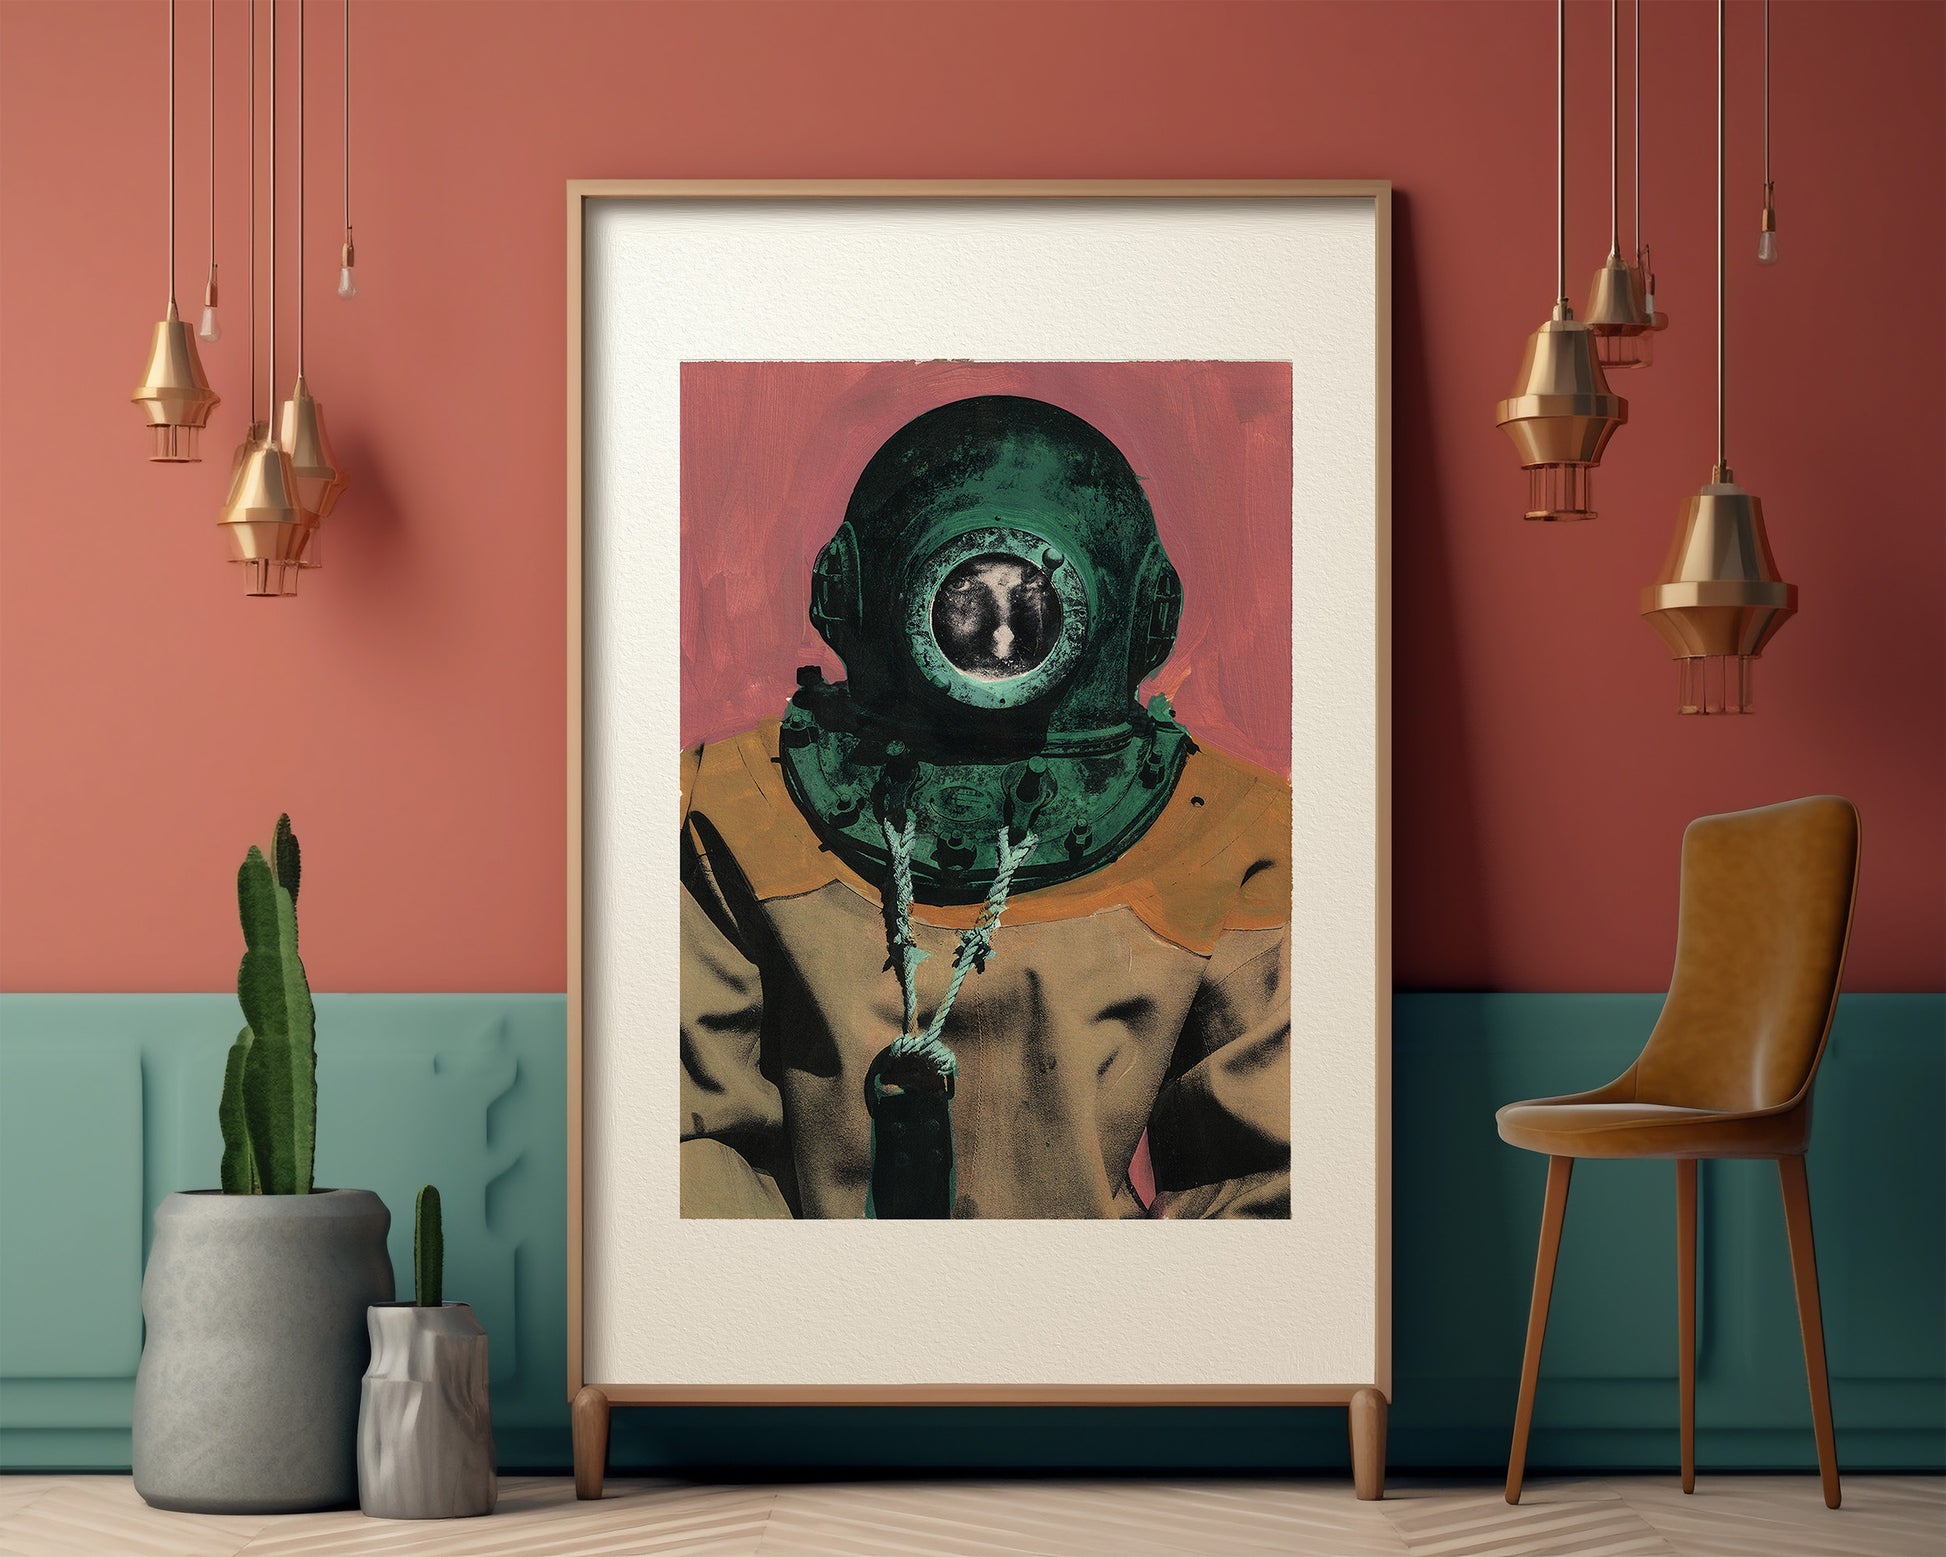 Painting Pop Art Wall Art from Greece | Pink & Green sponge diver from Kalymnos island, by George Tatakis - inside an eclectic room